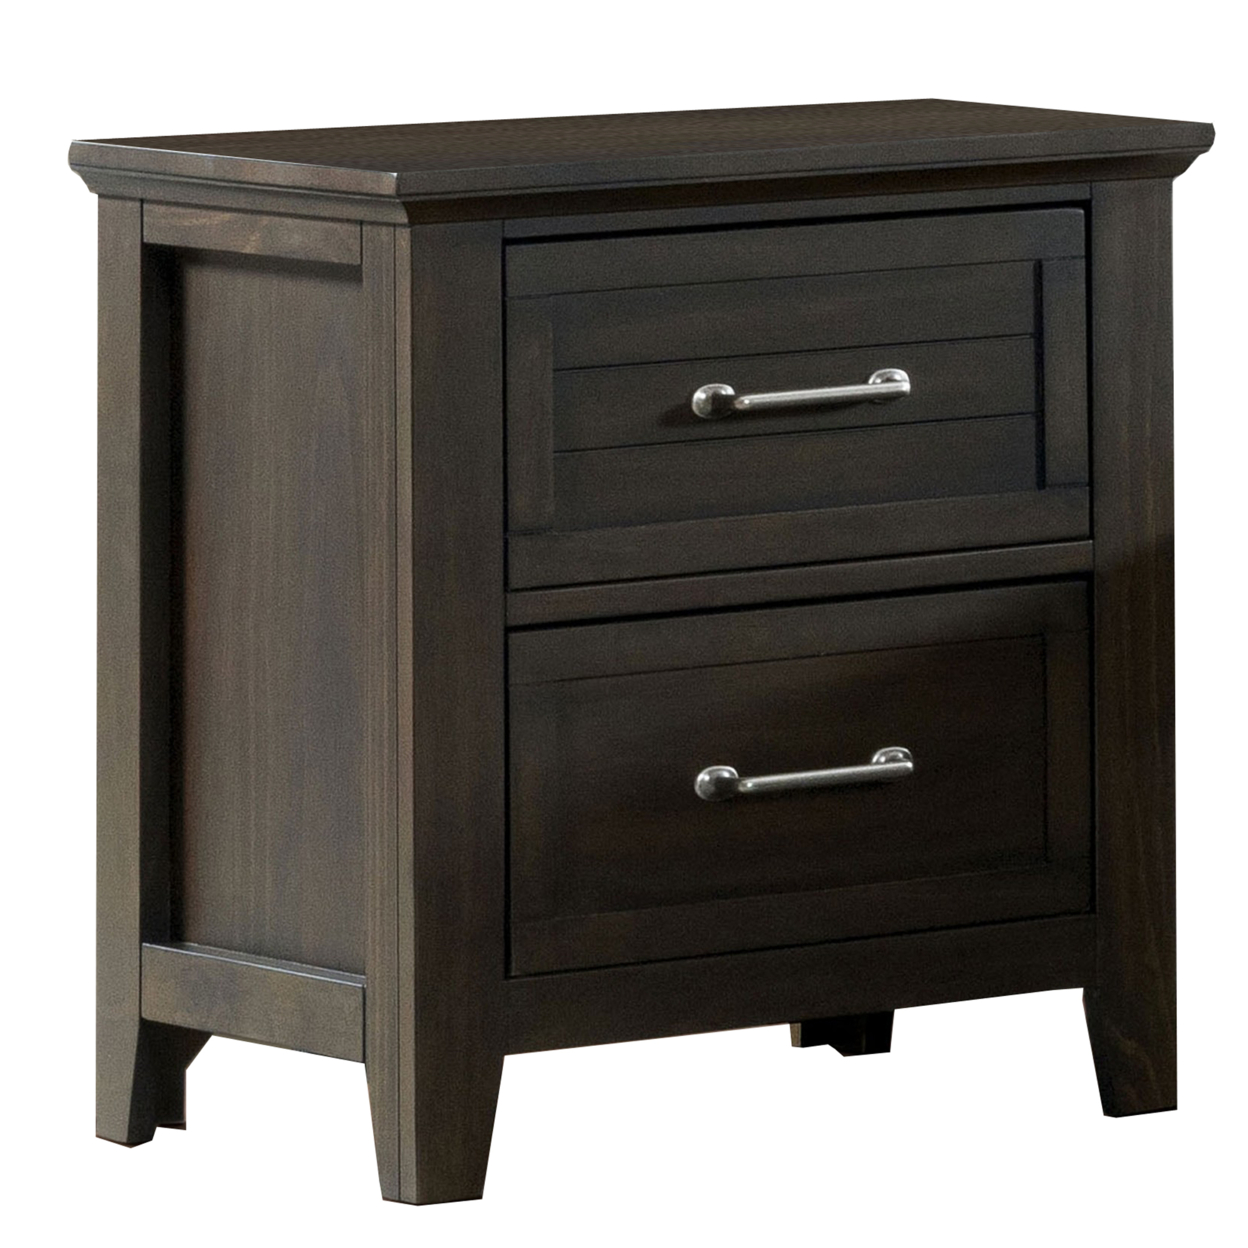 2 Drawer Wooden Nightstand With Plank Style Front, Brown- Saltoro Sherpi